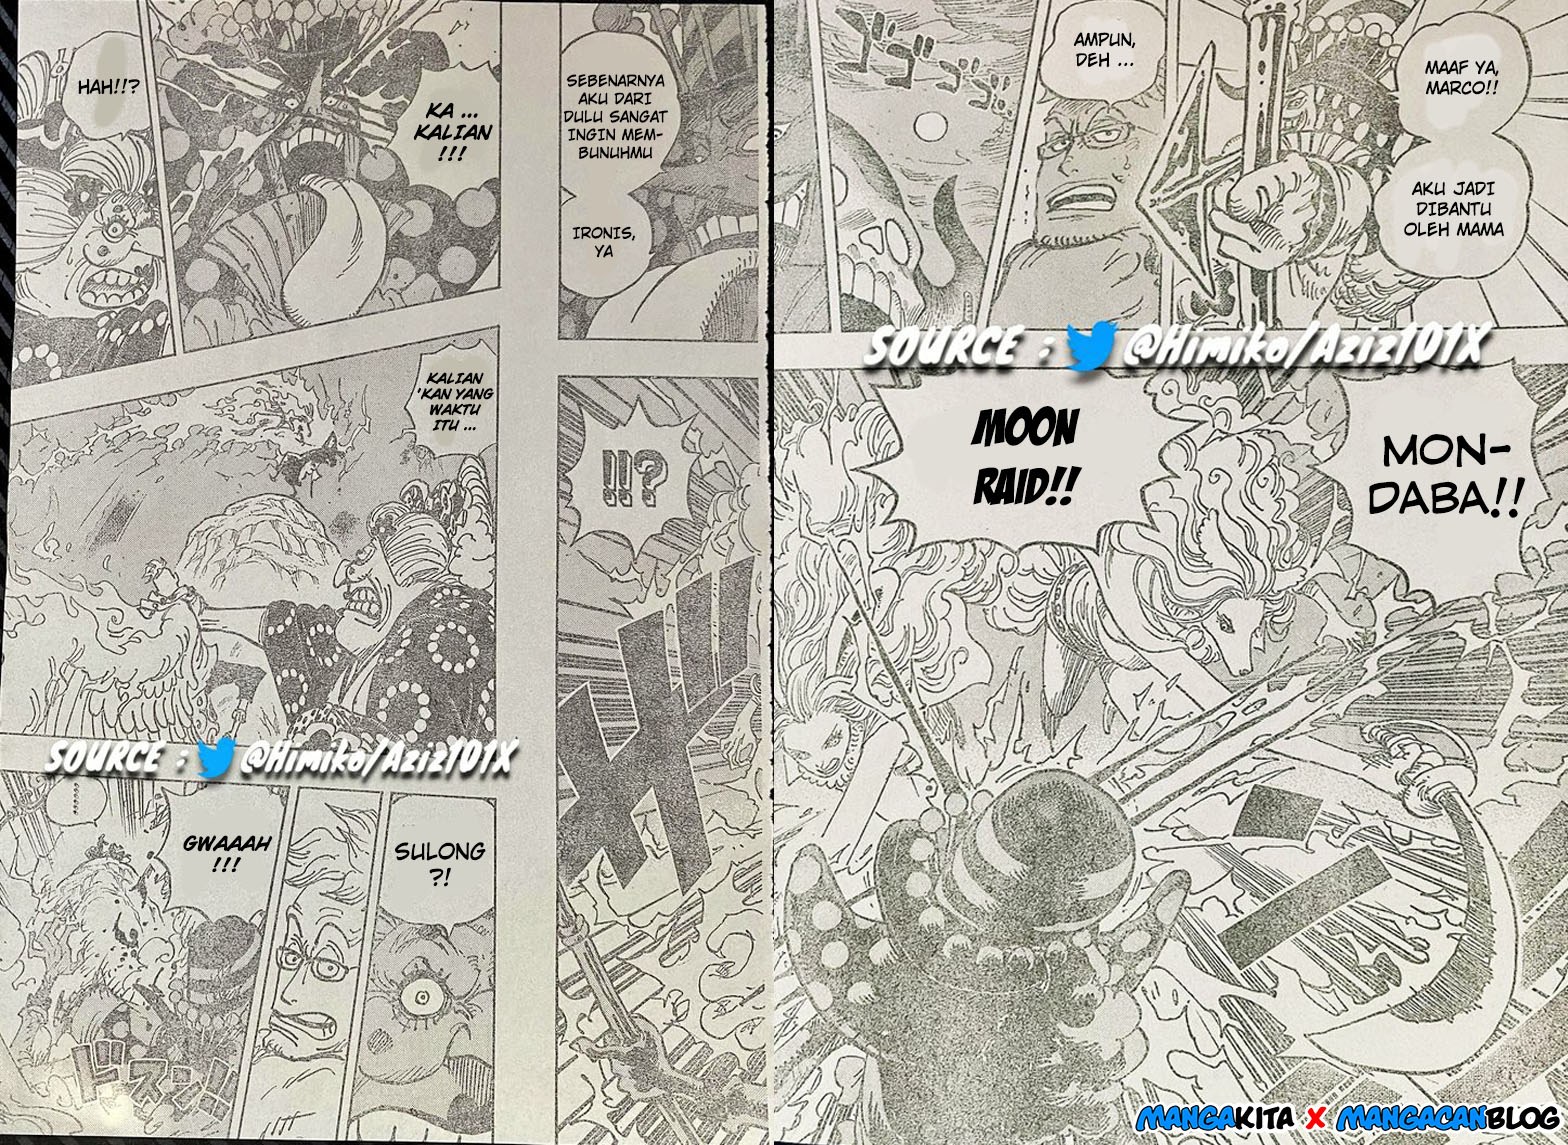 One Piece Chapter 995 LQ